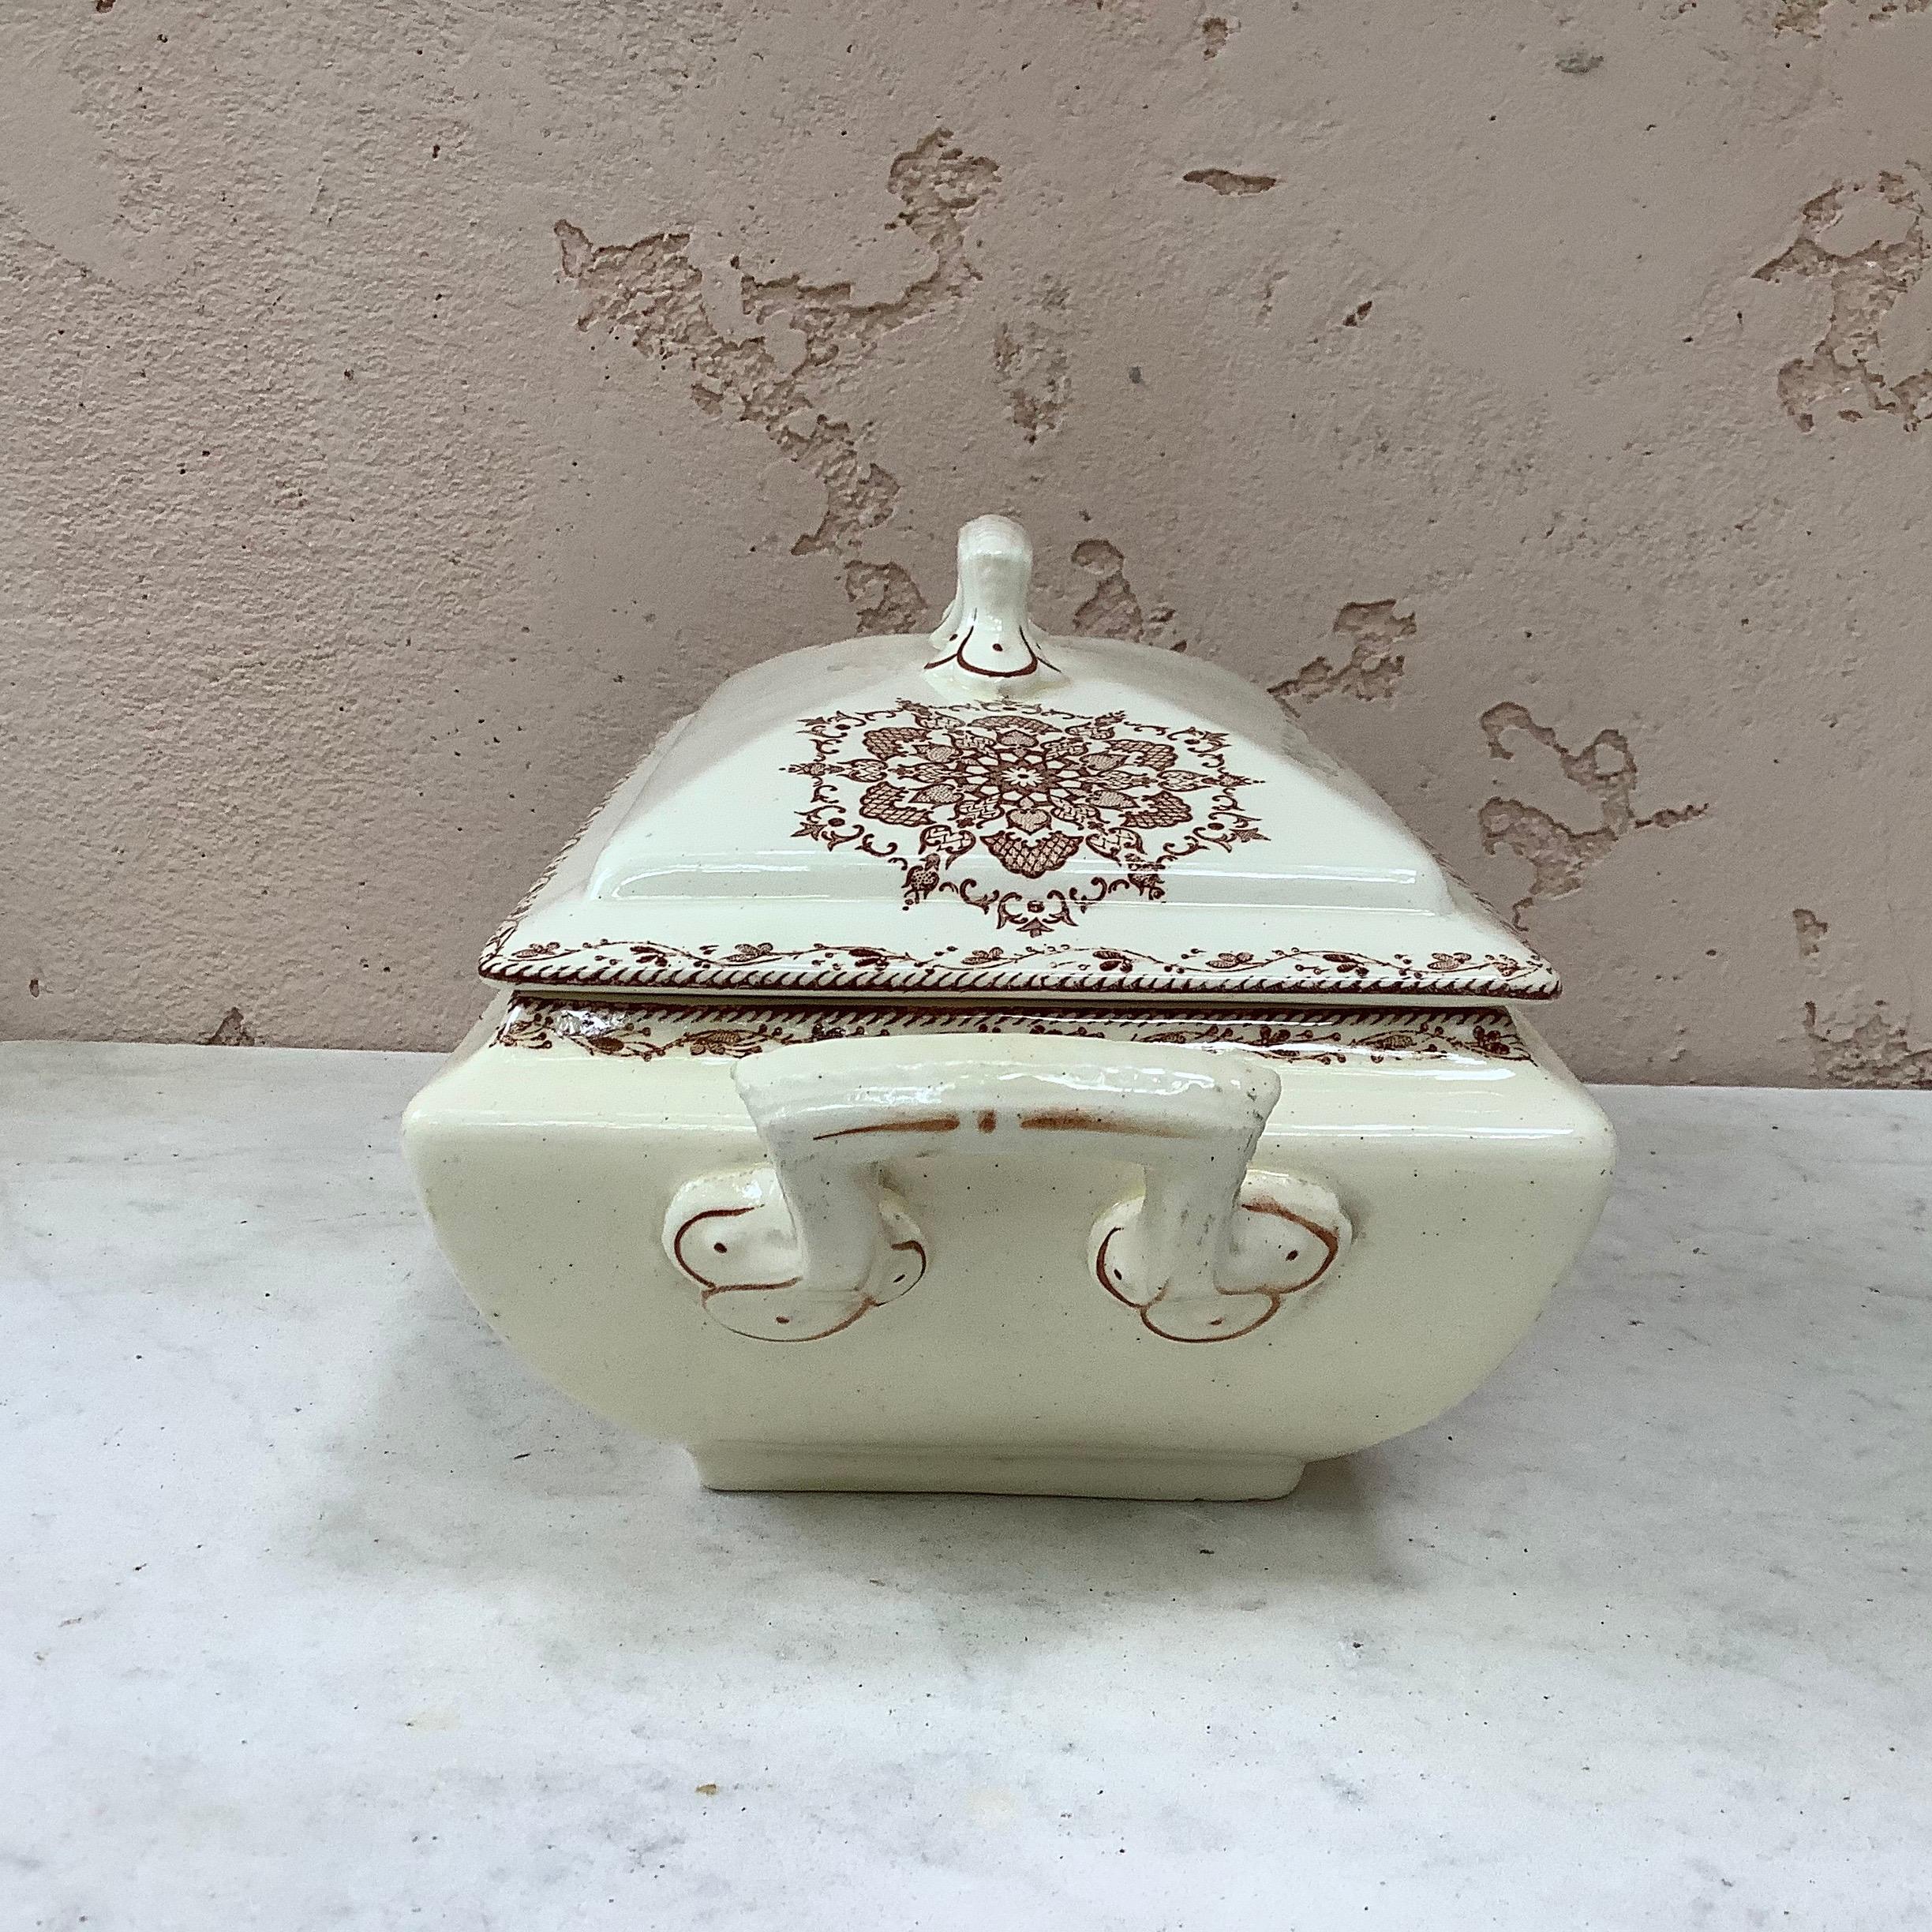 French faience covered dish signed Salins, circa 1890.
Decorated with snowflakes.